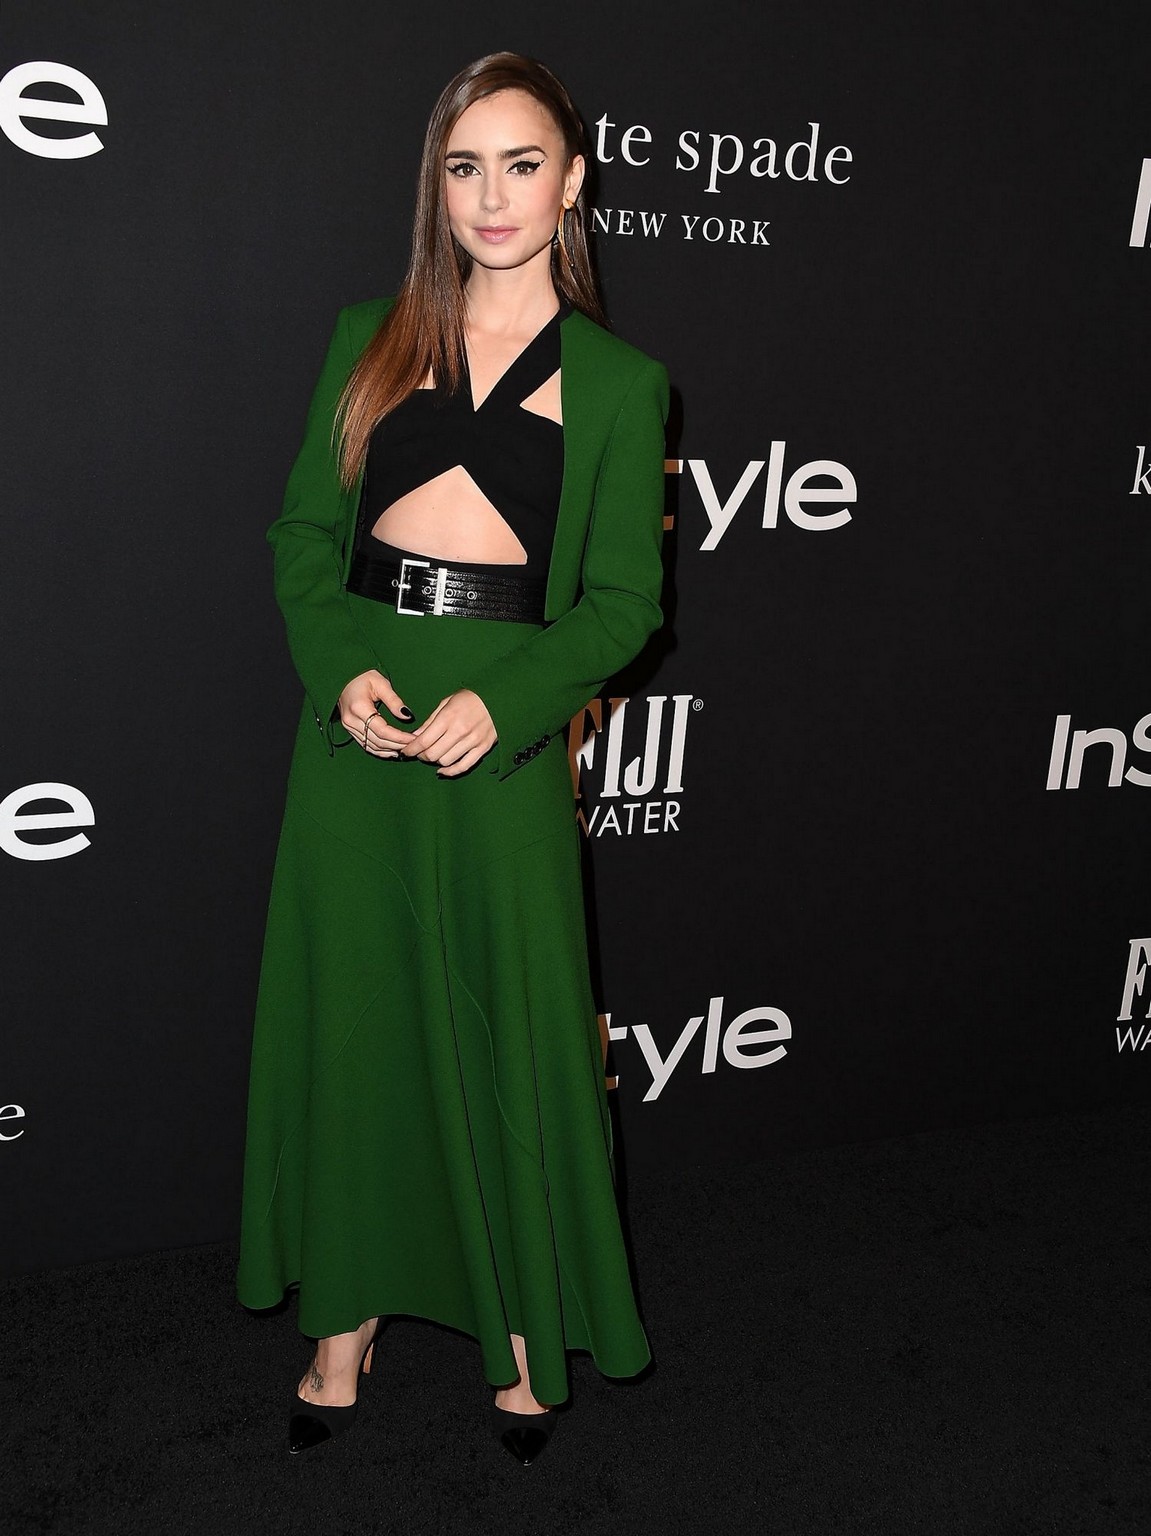 4th_Annual_InStyle_Awards_at_The_Getty_Center_81.jpg